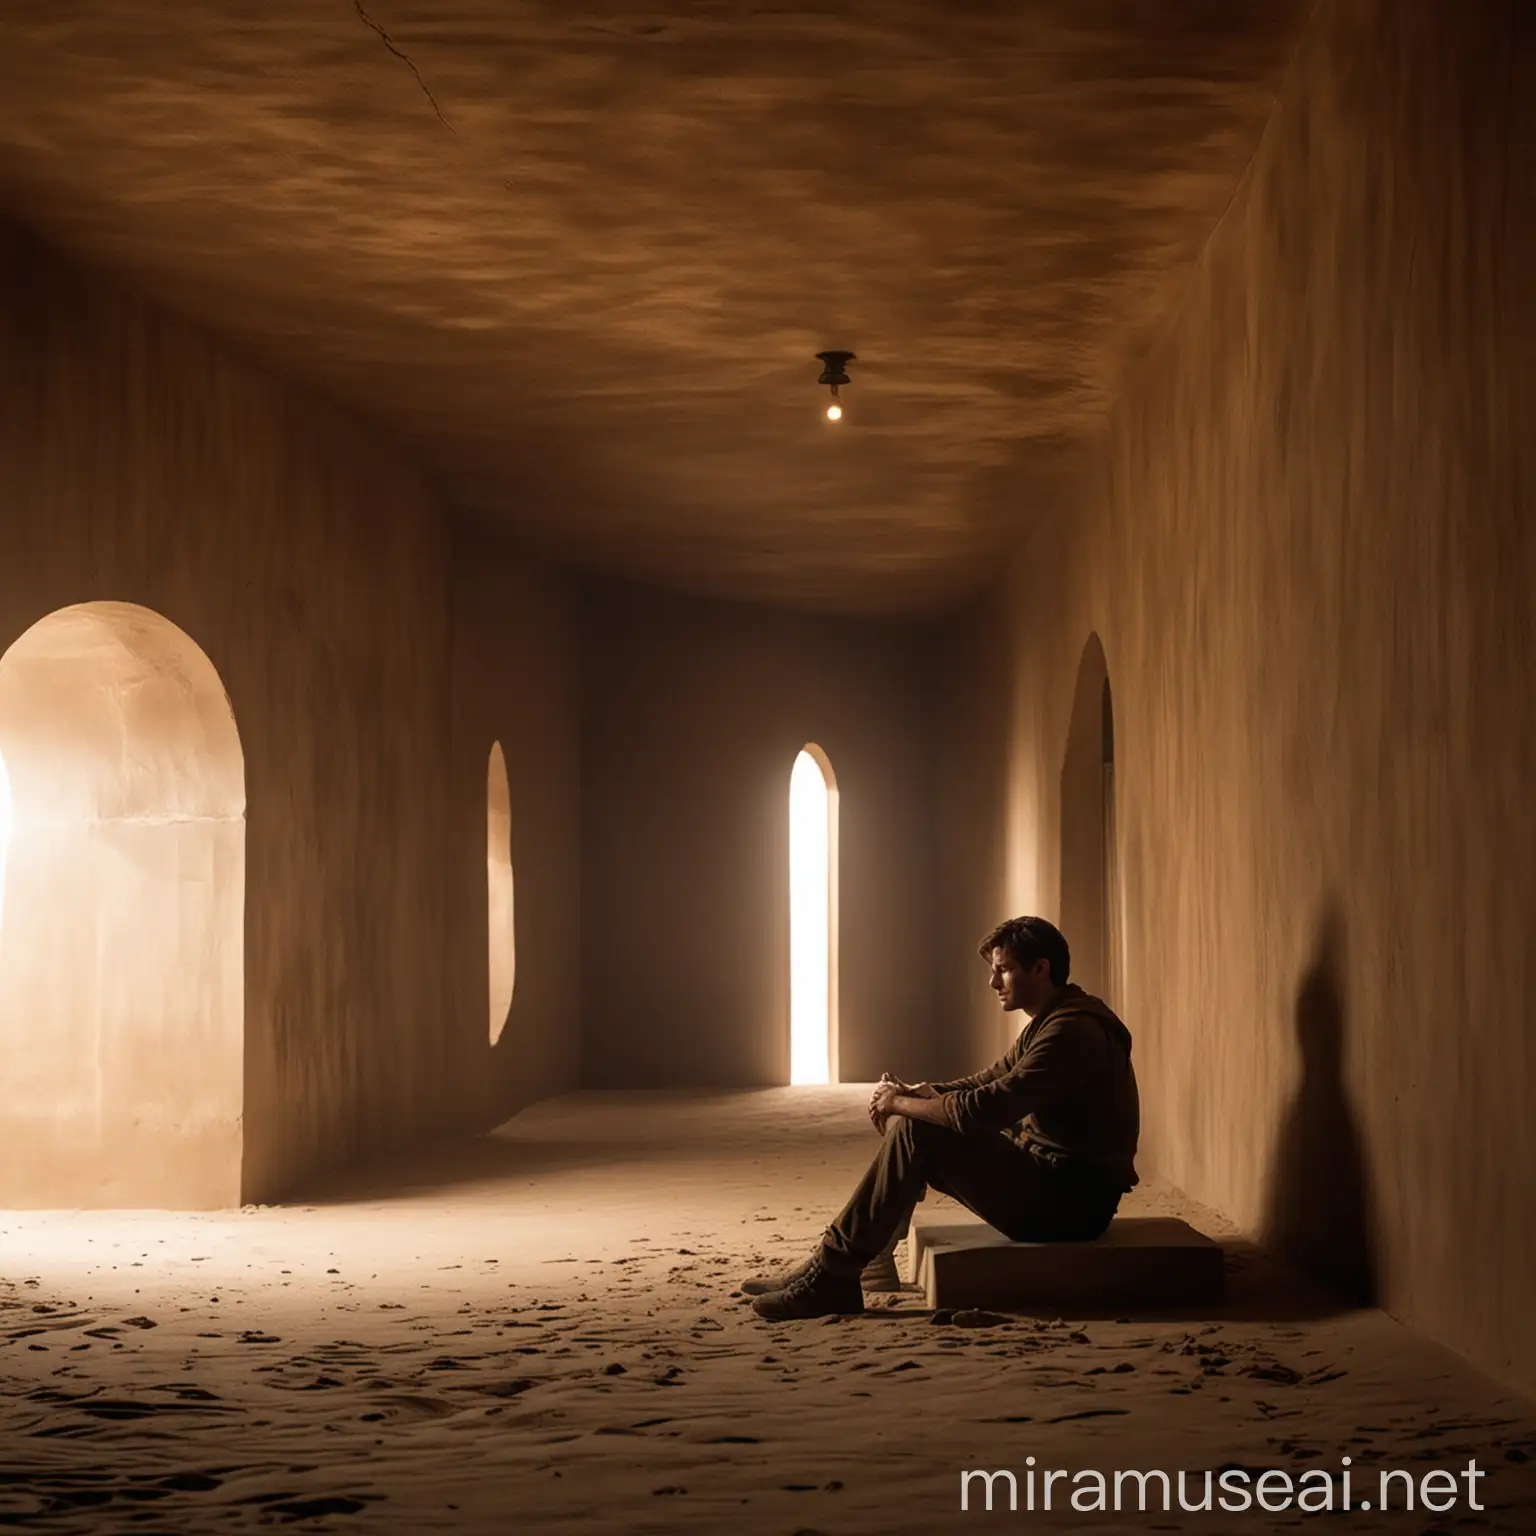 Dune style a man sitting in a building with a some sort of light